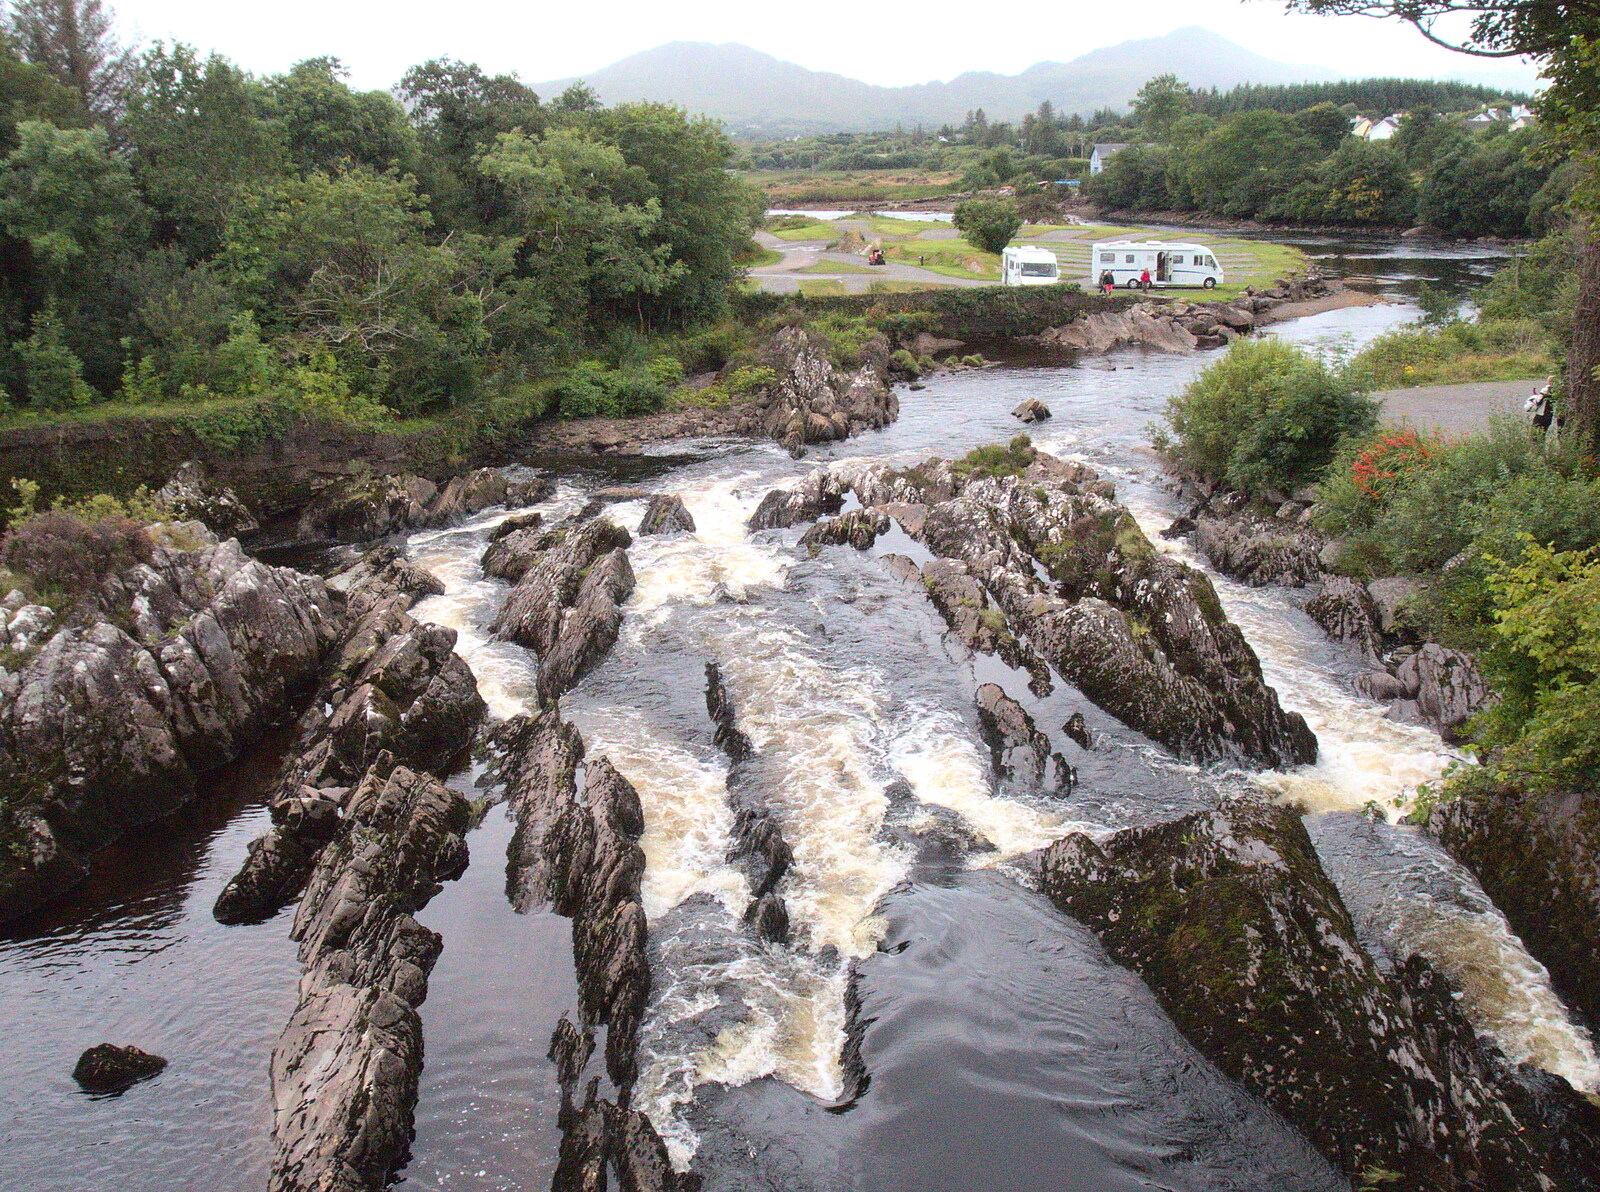 The raging rapids of the Sneem river from A Seafari Boat Trip, Kenmare, Kerry, Ireland - 3rd August 2017